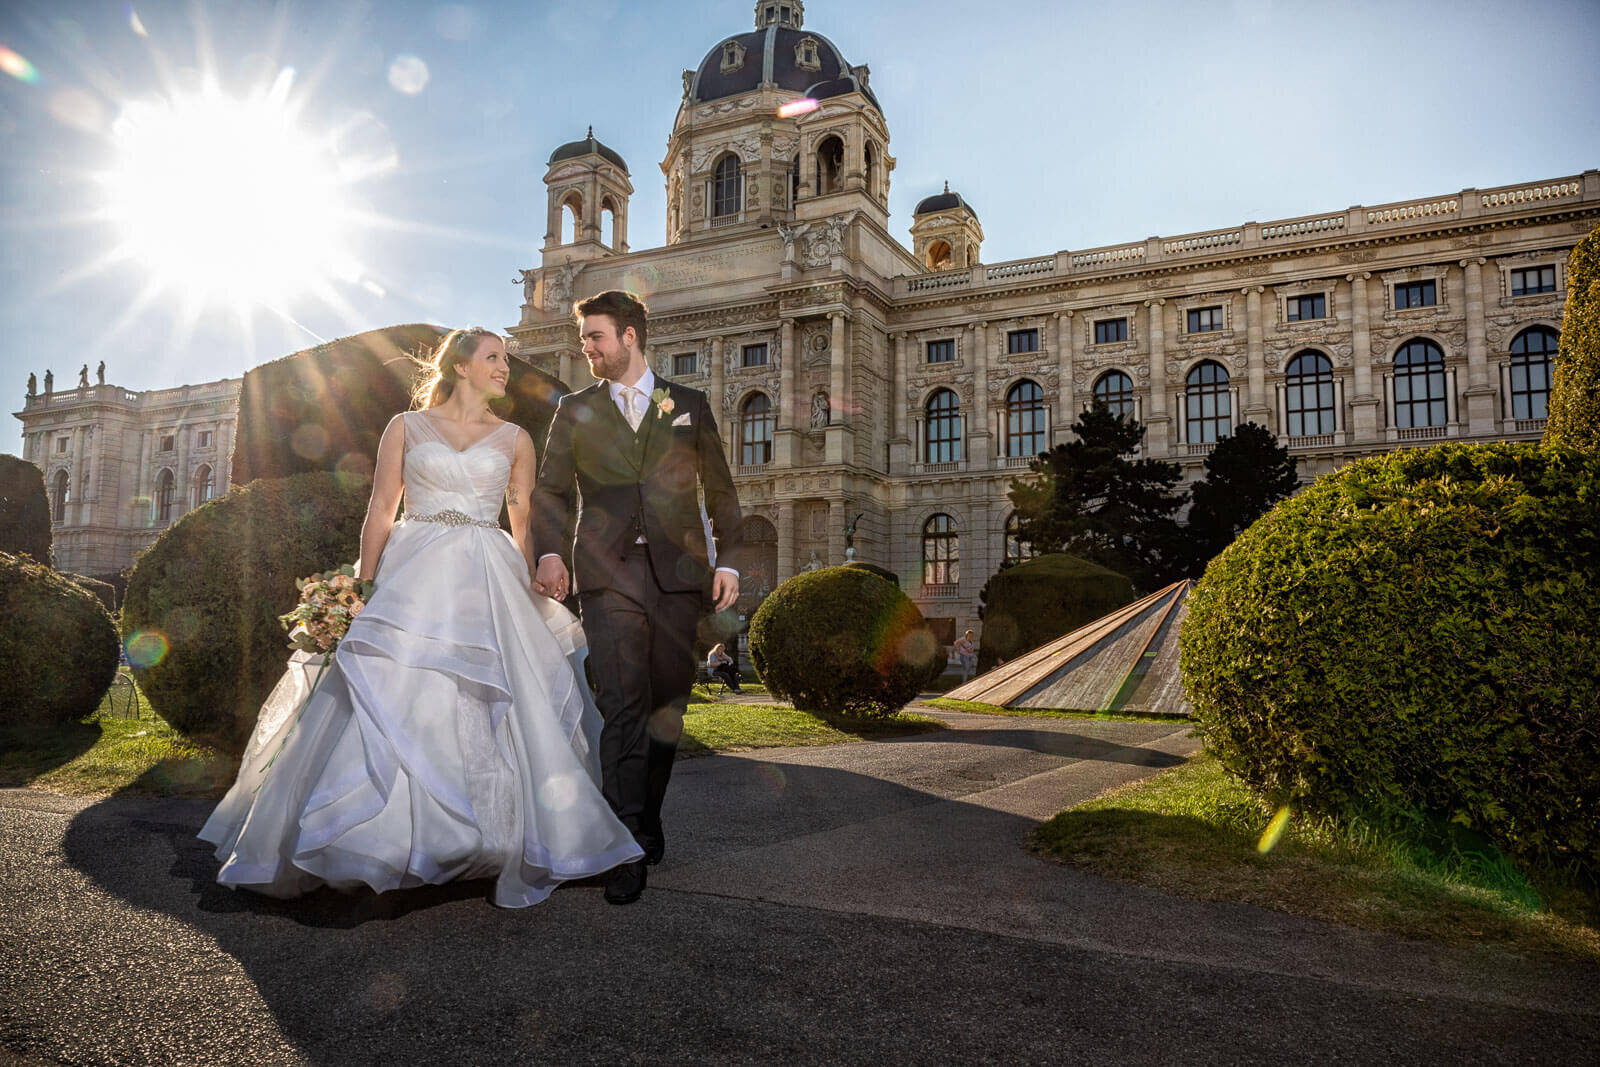 Folklore Museum Vienna with bridal couple in the foreground and low sun